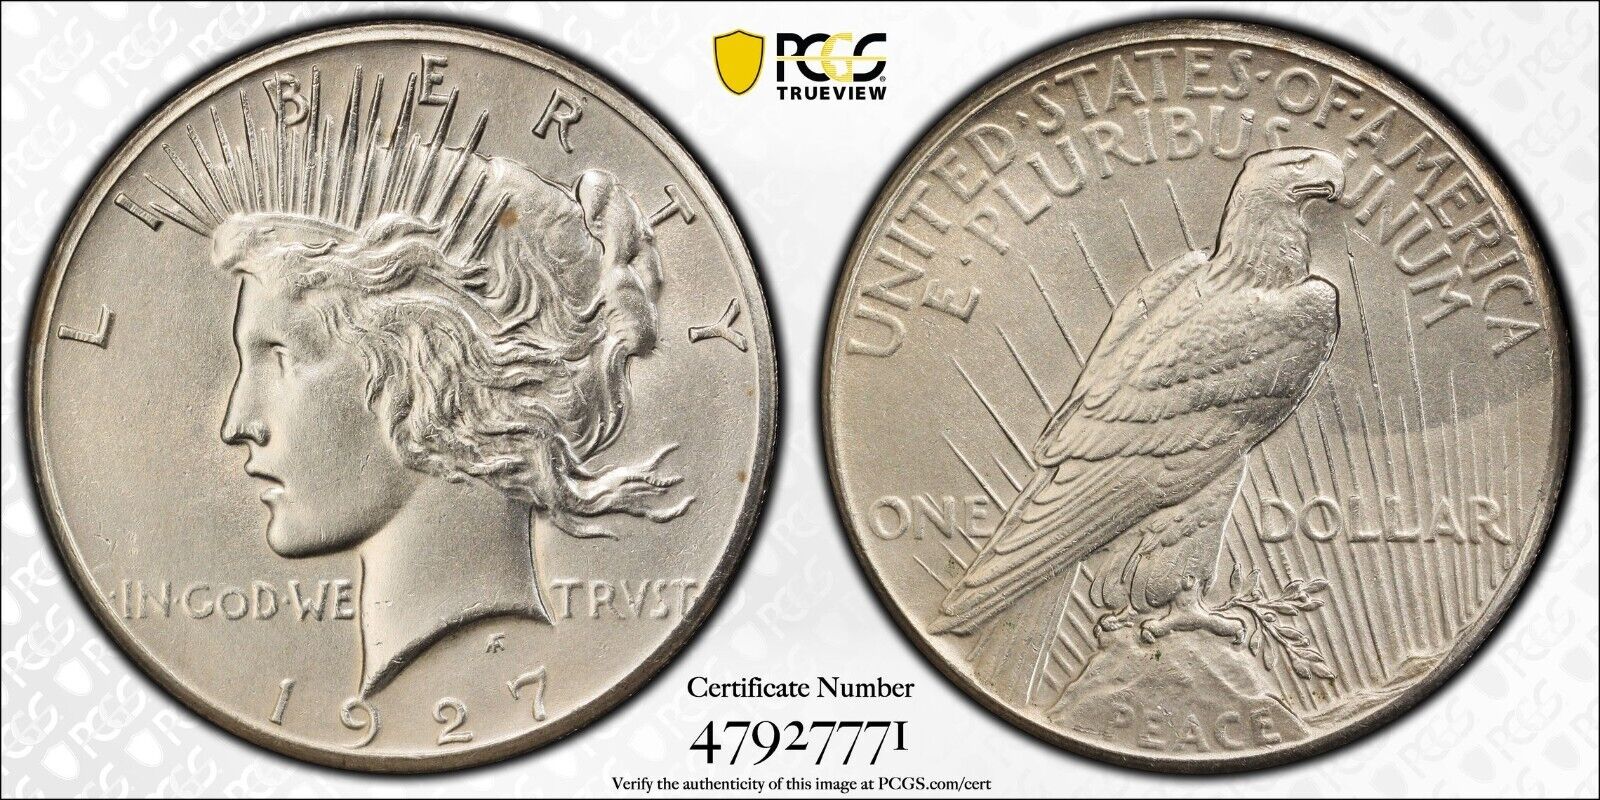 U.S. 1927 PEACE DOLLAR PCGS CLEANED - UNC DETAIL